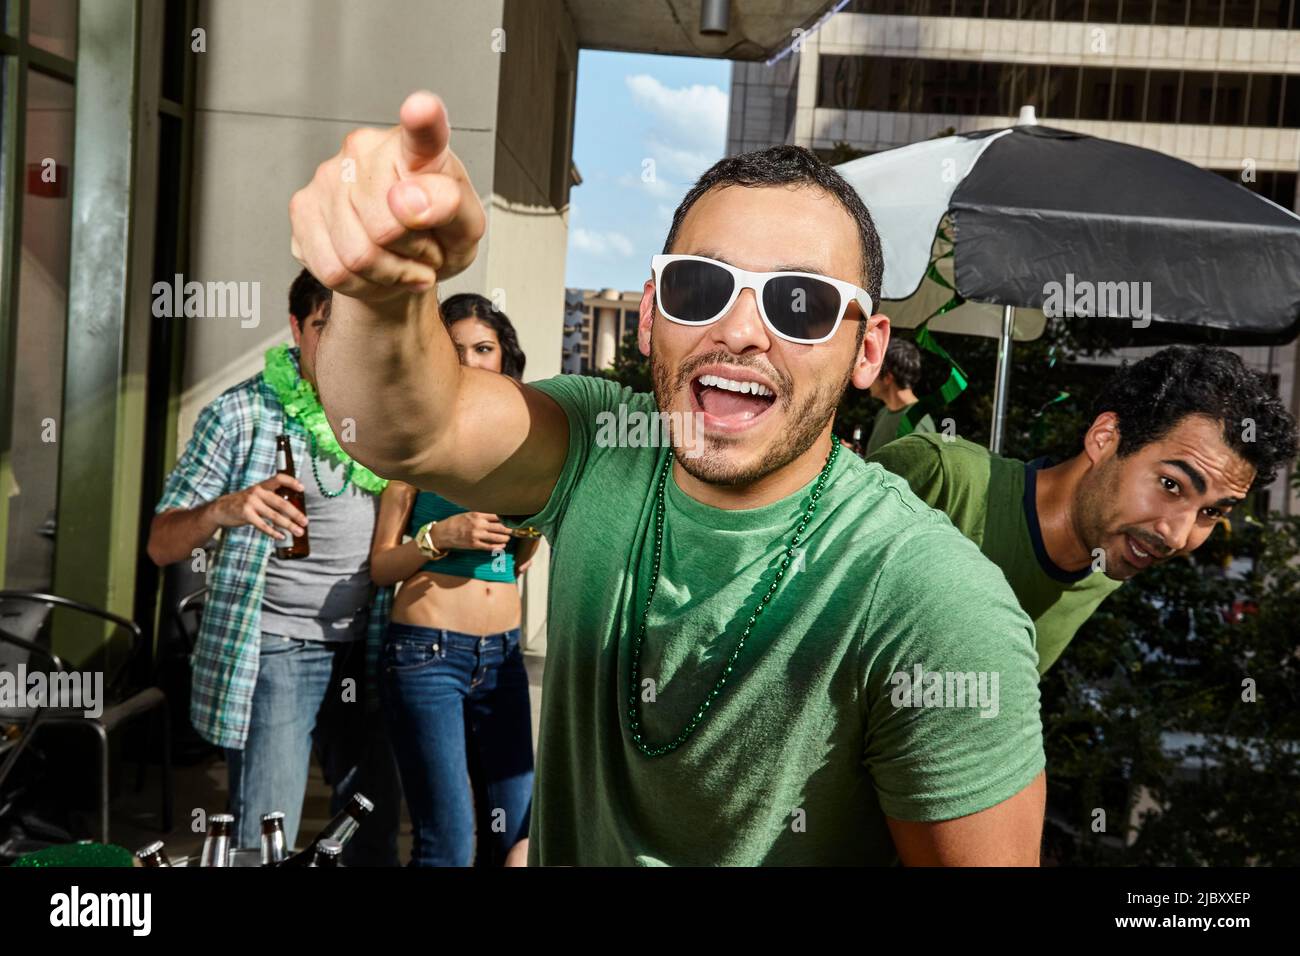 Man smiling and pointing at cameras while at St Patrick's day party. Stock Photo